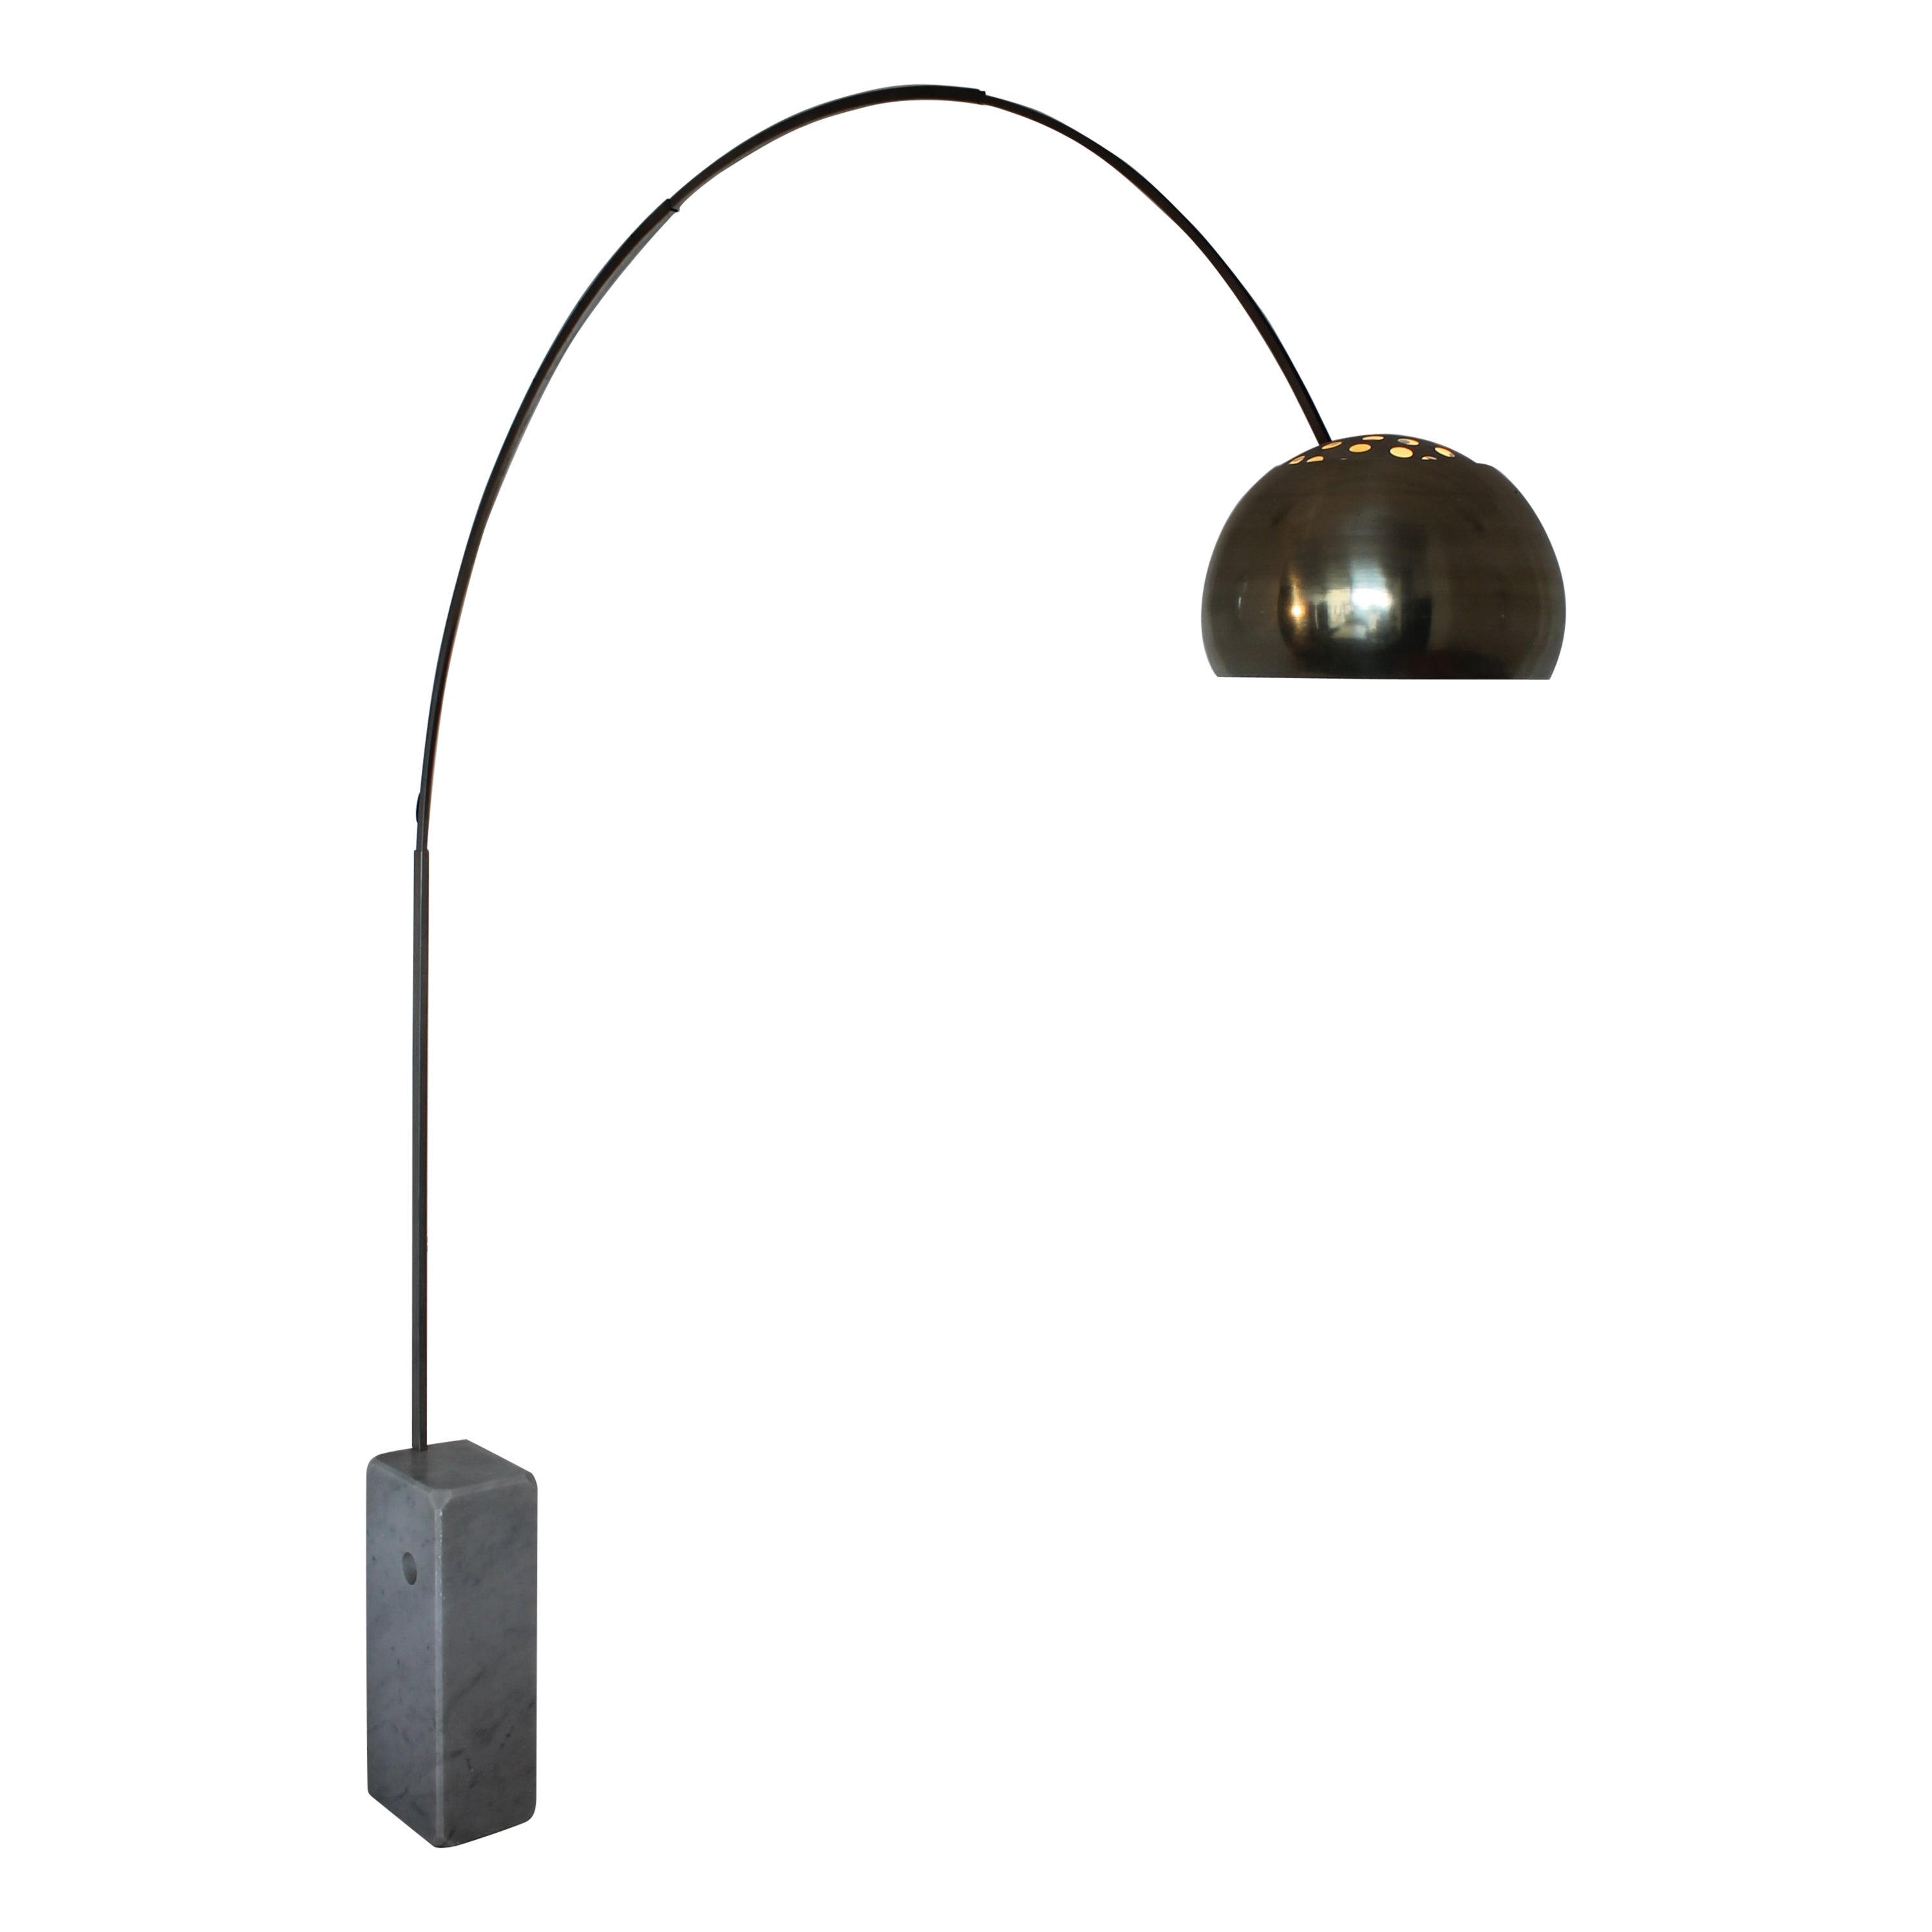 Arco Flos Lamp by Achille and Pier Giacomo Castiglioni, Italy '70s For Sale